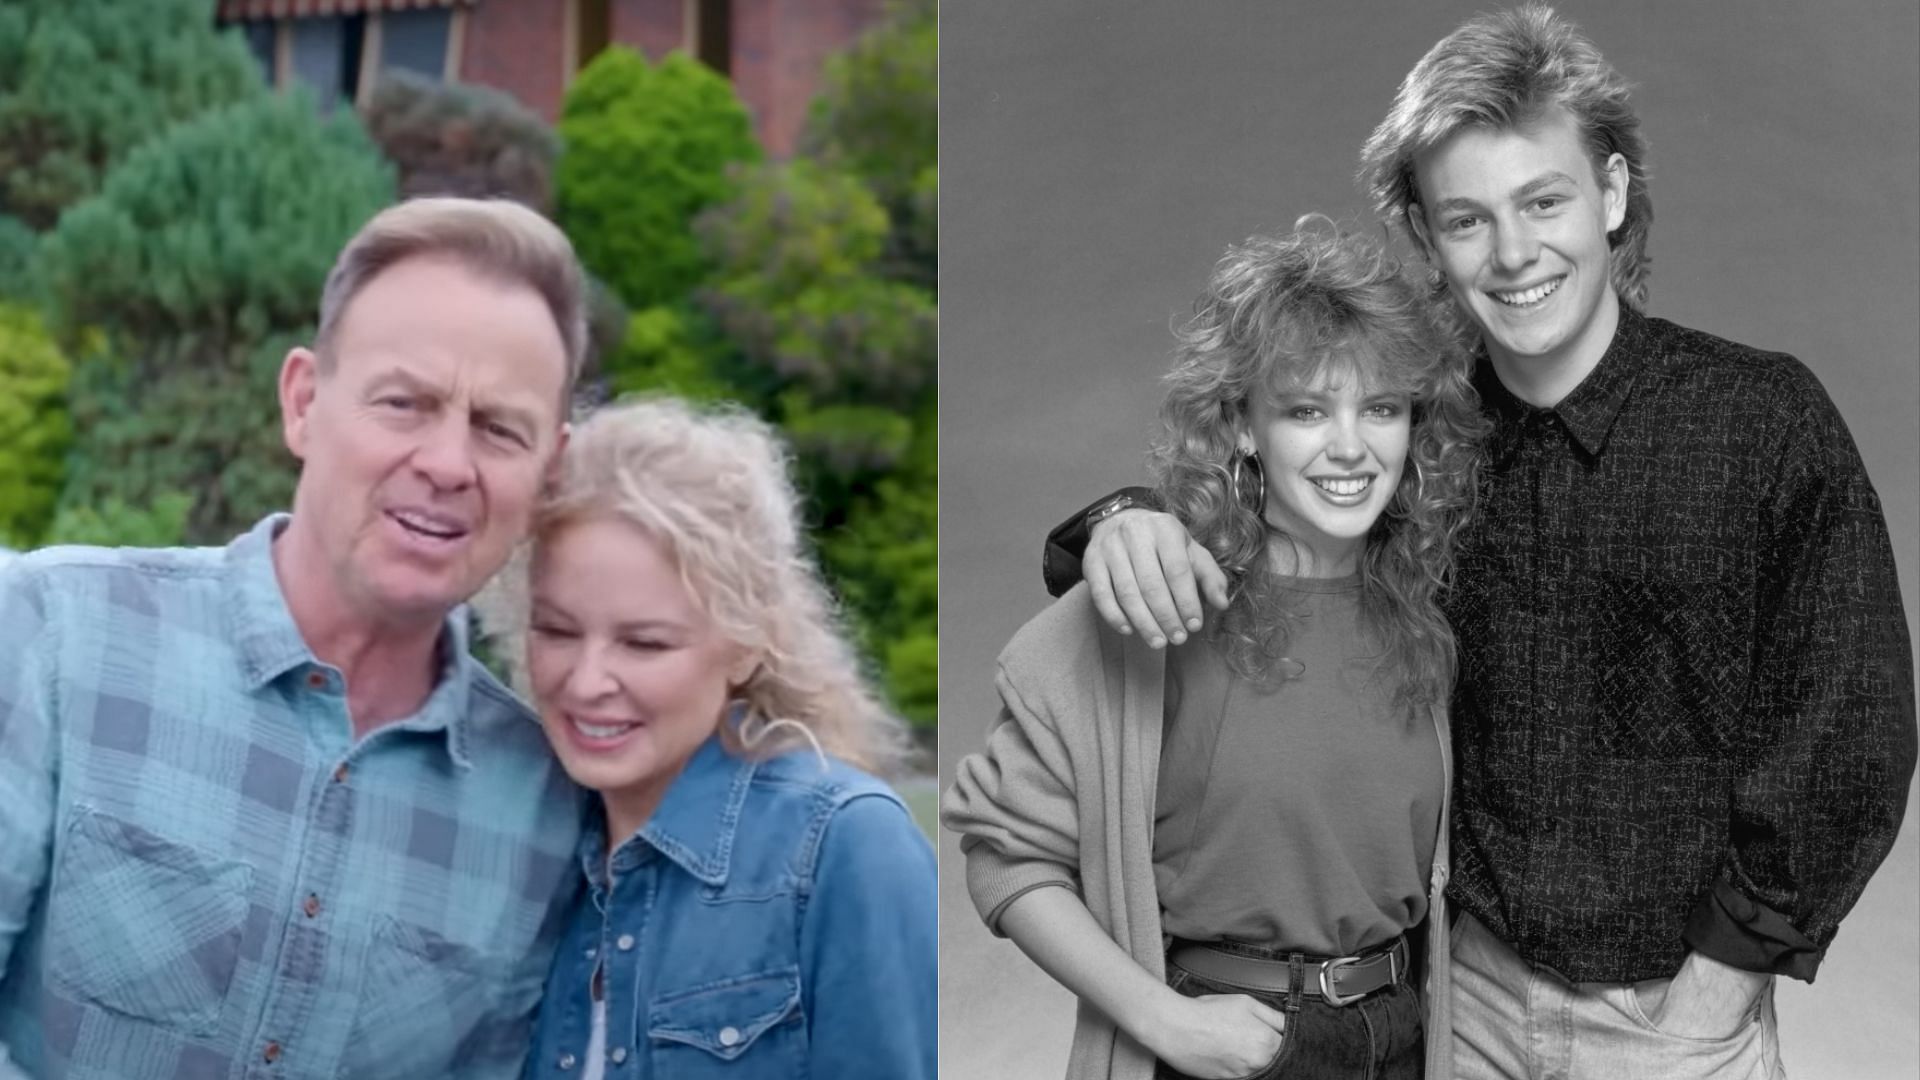 Jason Donovan and Kylie Minogue now and then (Image via Dave Hogan@Getty and YouTube@ Neighbours Official channel)